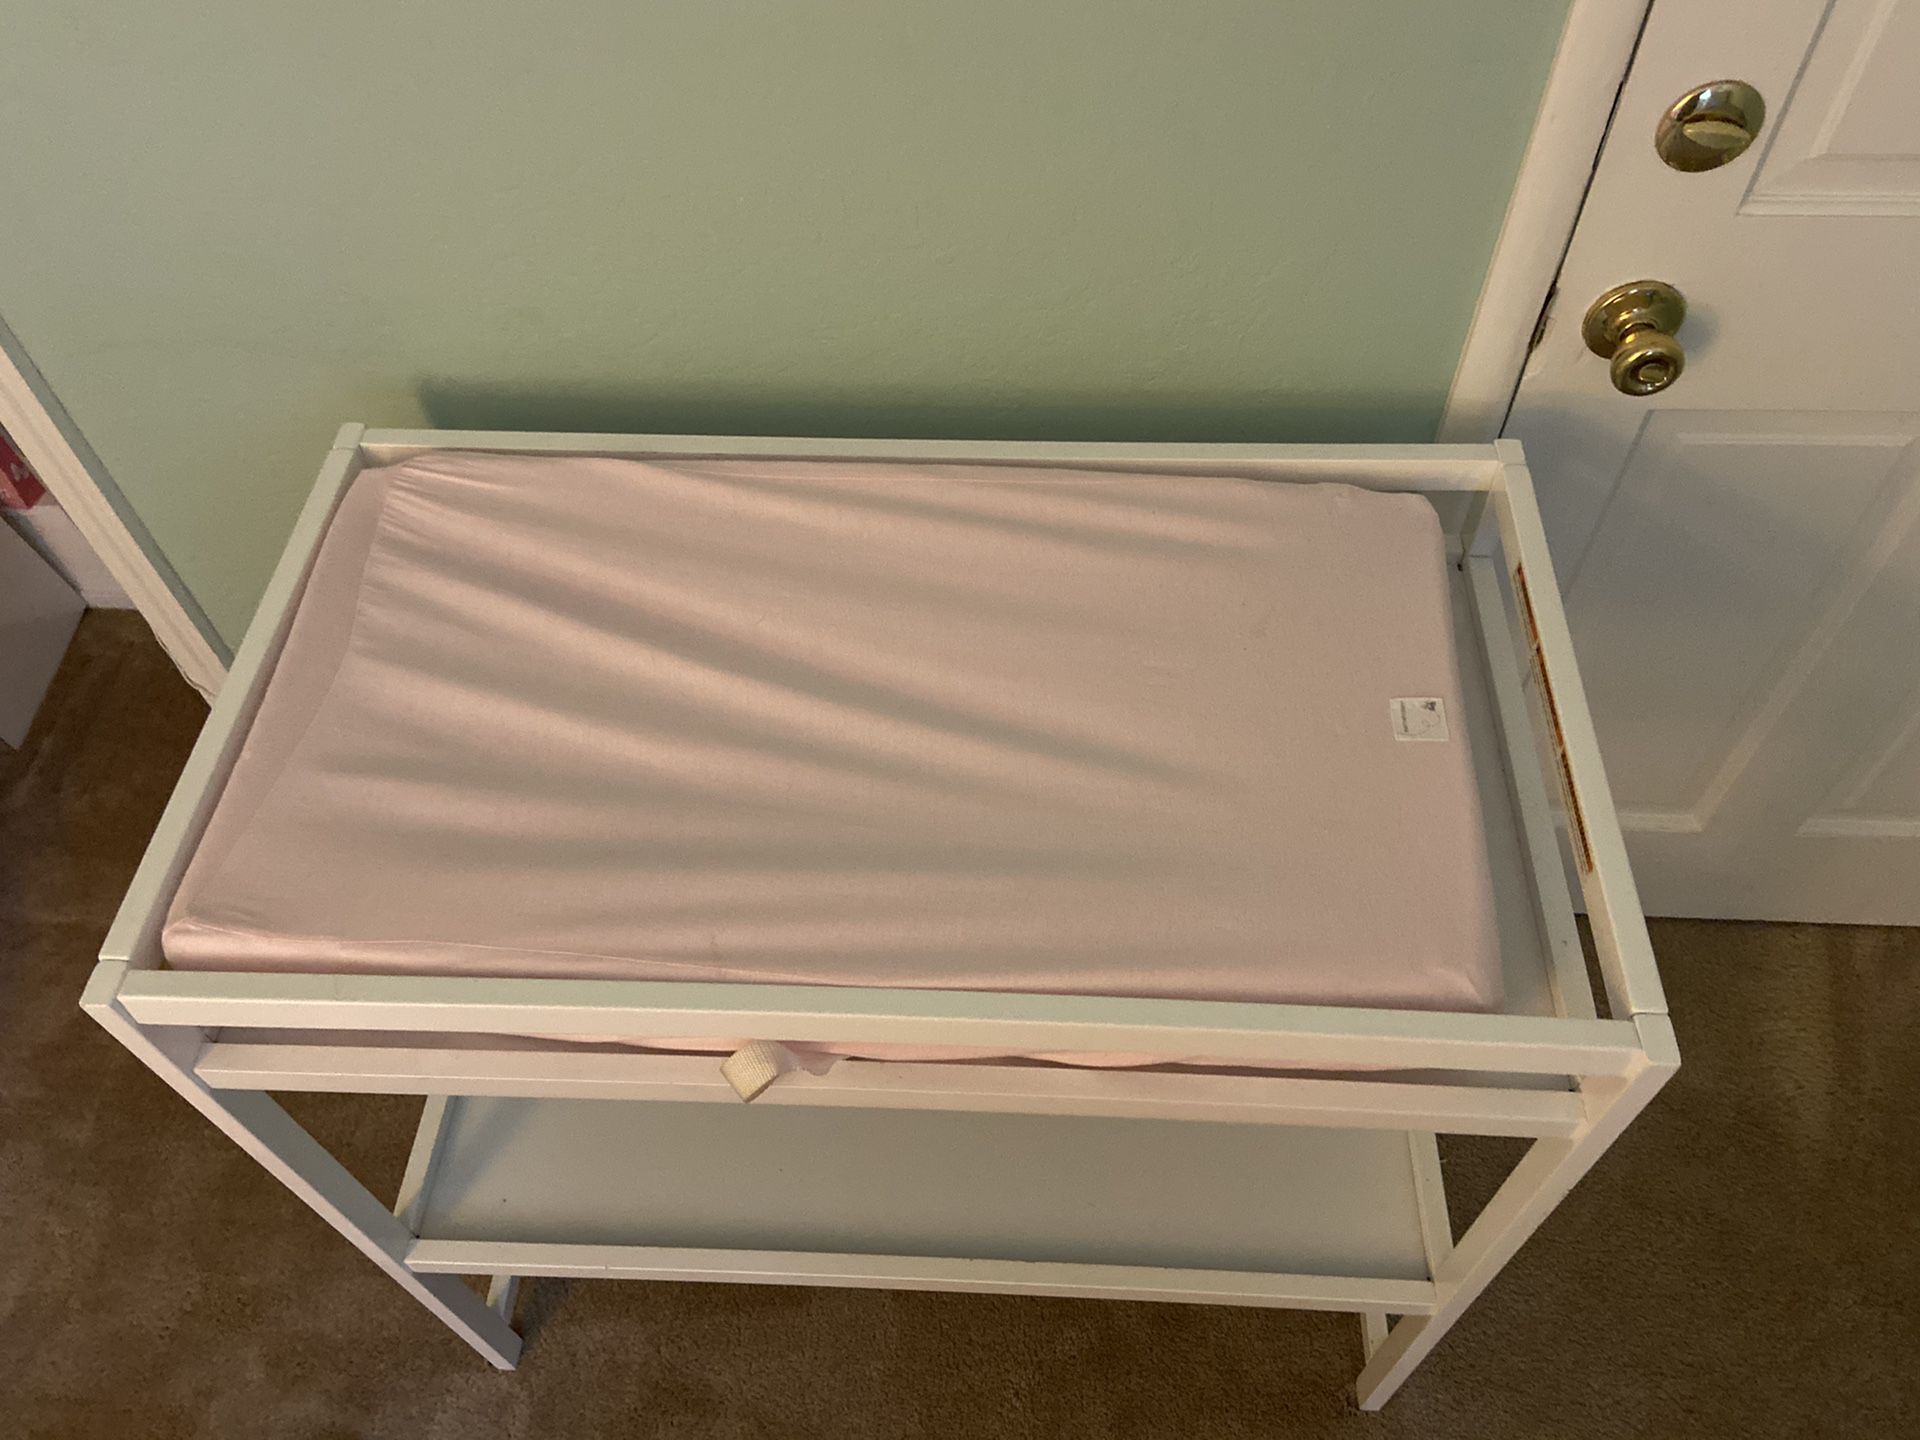 Changing table with pad and cover